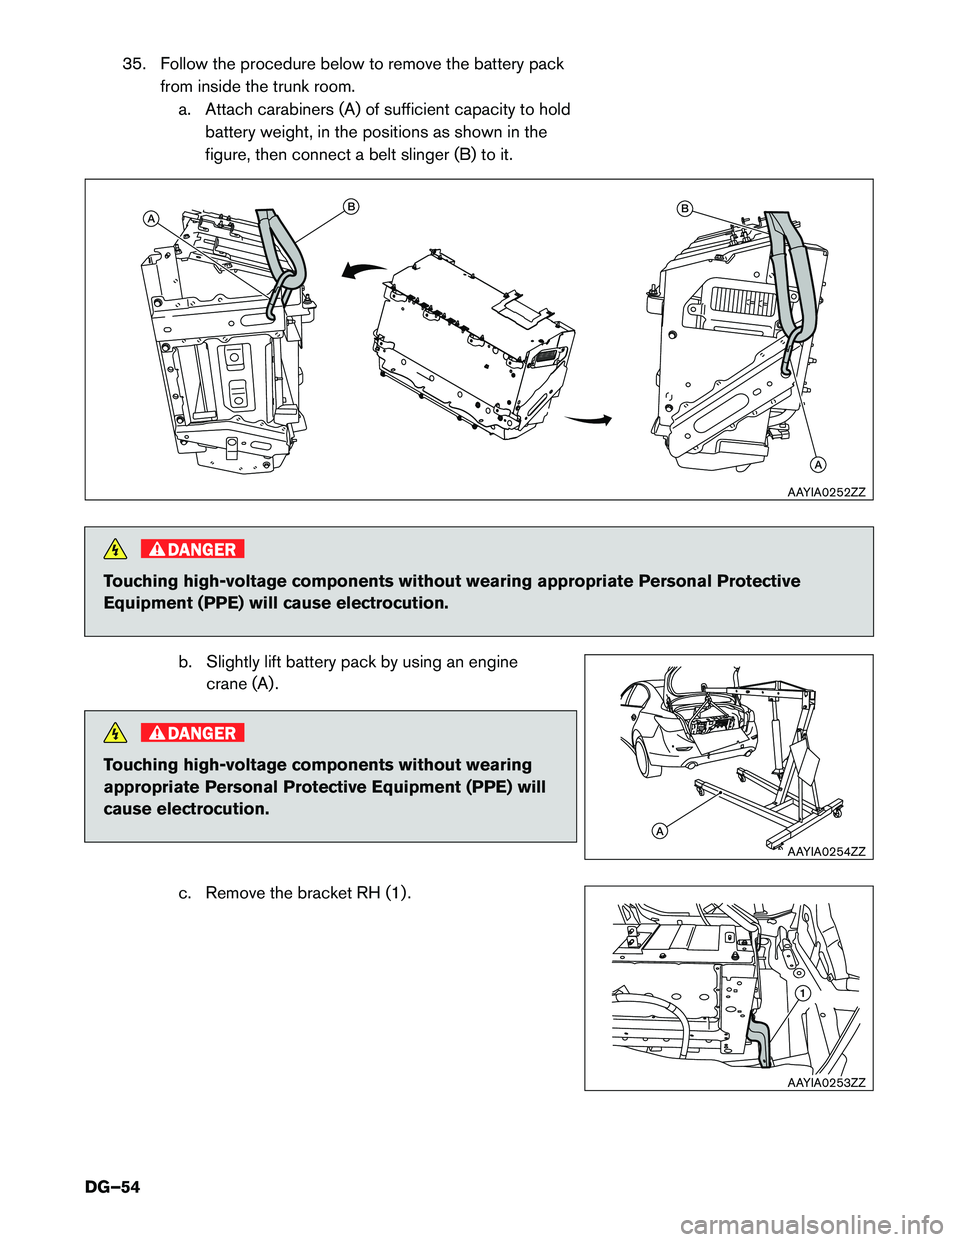 INFINITI Q50 HYBRID 2018  Dismantling Guide 35. Follow the procedure below to remove the battery pack
from inside the trunk room.
a. Attach carabiners (A) of sufficient capacity to hold battery weight, in the positions as shown in the
figure, t